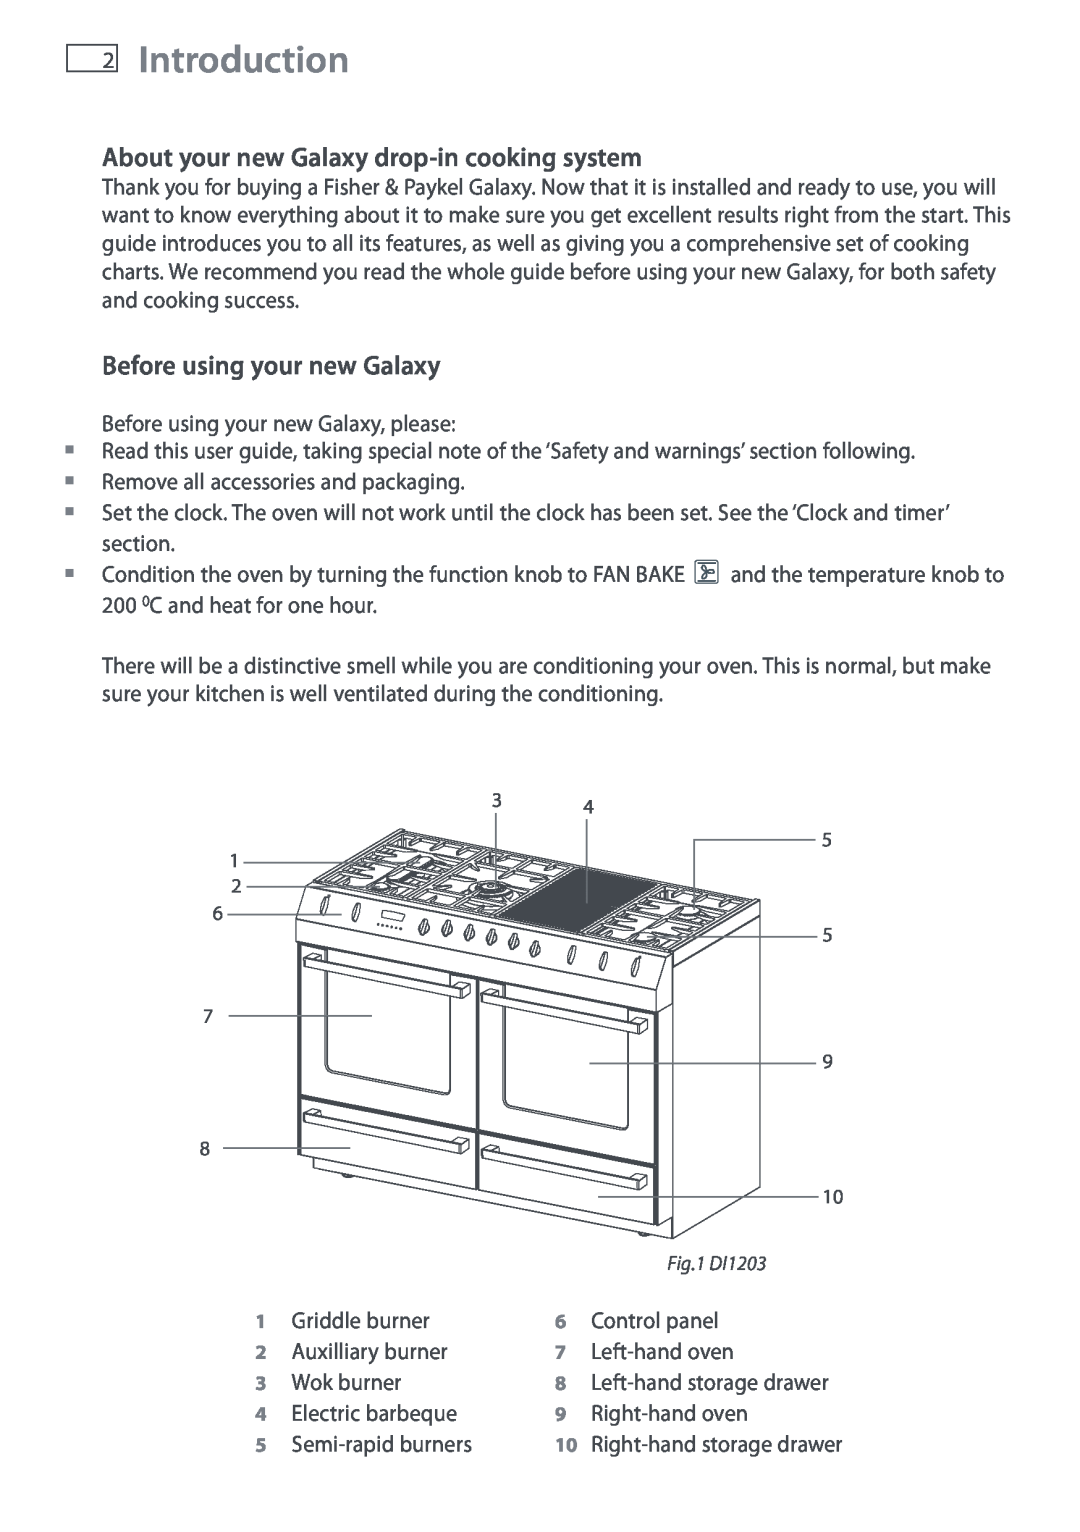 Fisher & Paykel DI1203 manual Introduction, About your new Galaxy drop-in cooking system, Before using your new Galaxy 